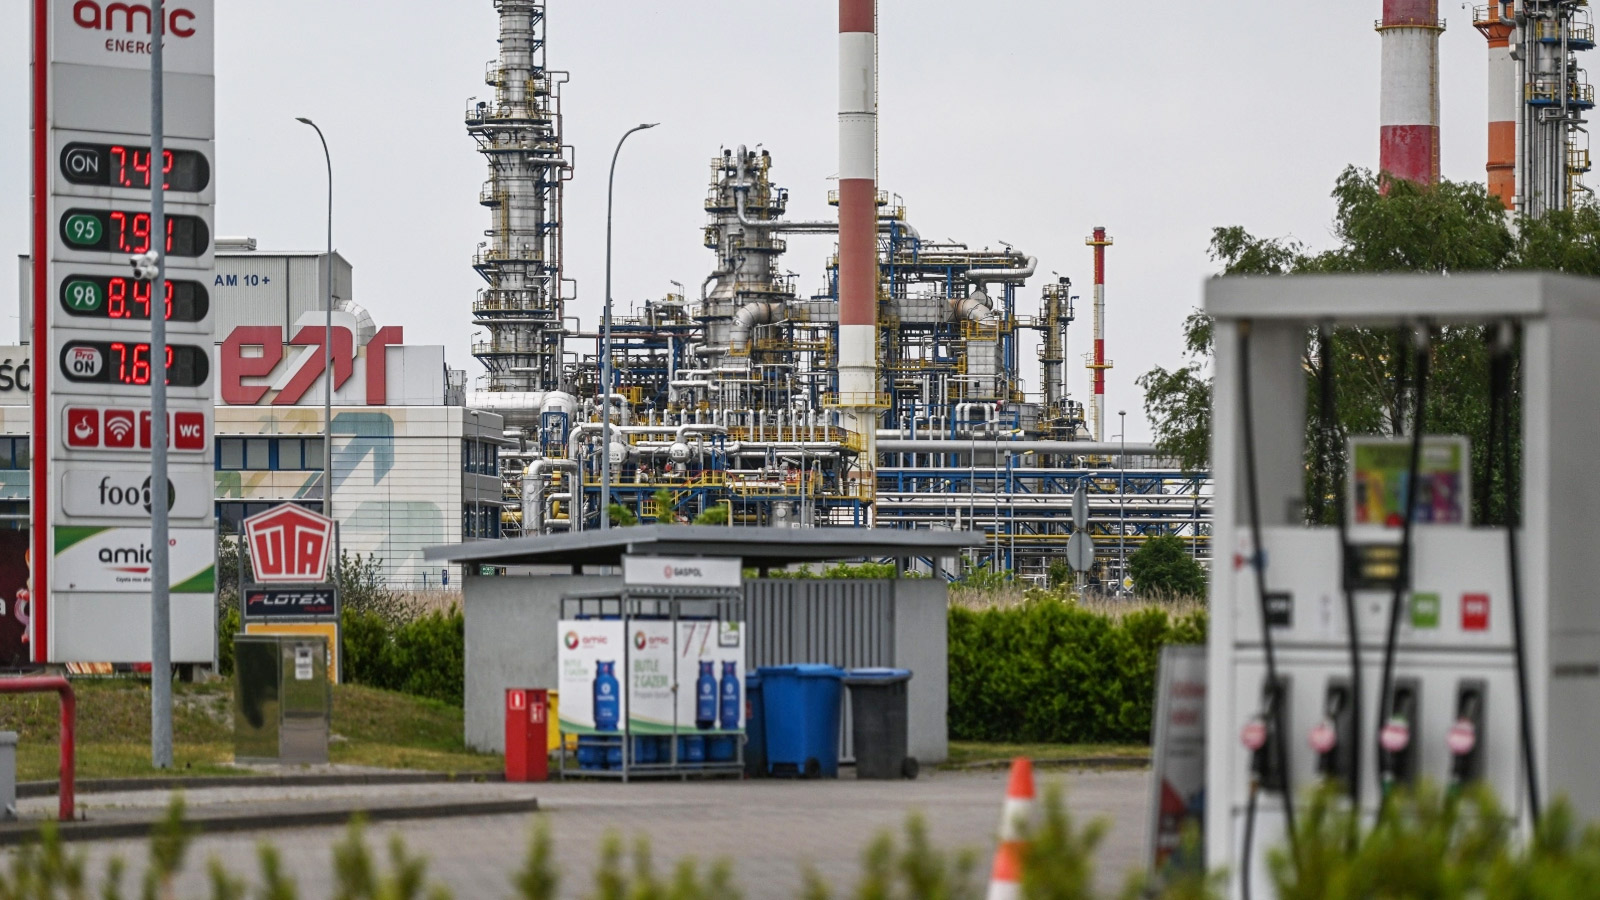 The LOTOS Oil Refinery and a nearby gas station in Gdansk, Poland.